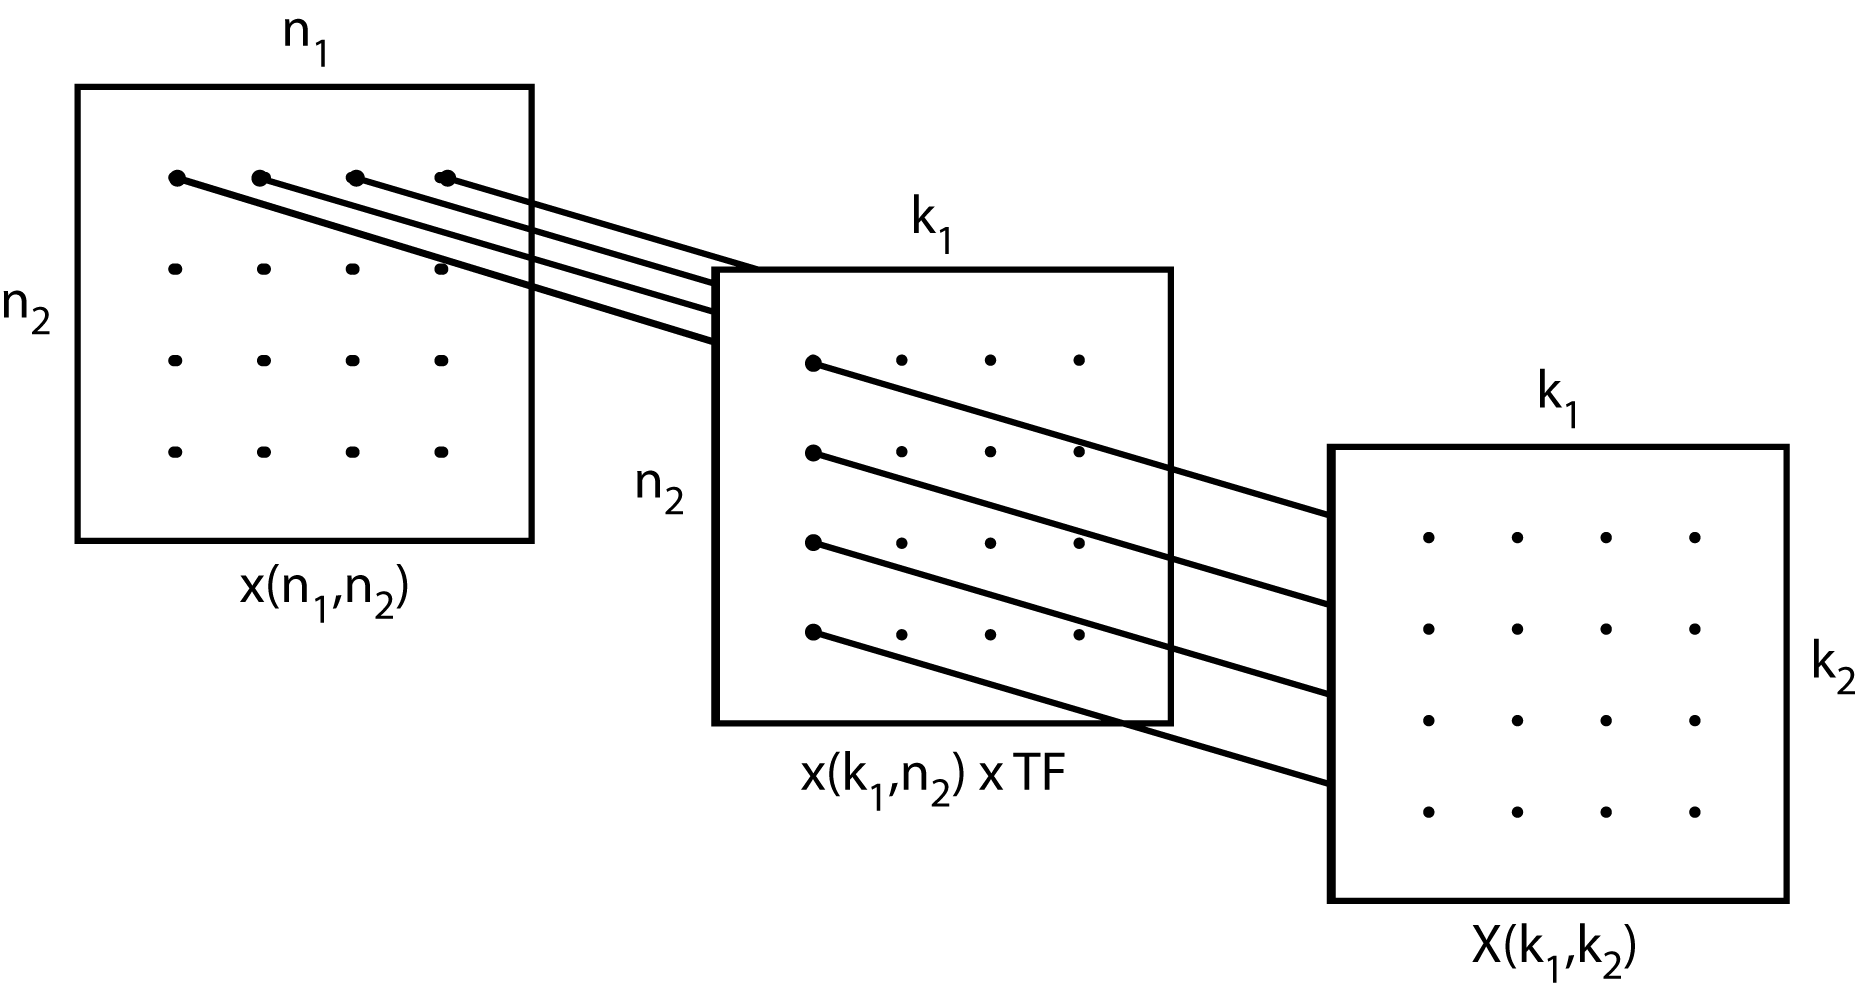 Three squares with a 4x4 array of dots on each. The square in the back is labeled x(n1,n2) and has lines extending from the top four dots. The next square is labeled x(k1,n2)xTF and has lines extending from the left column of dots extending to the next square which is labeled X(k1,k2)